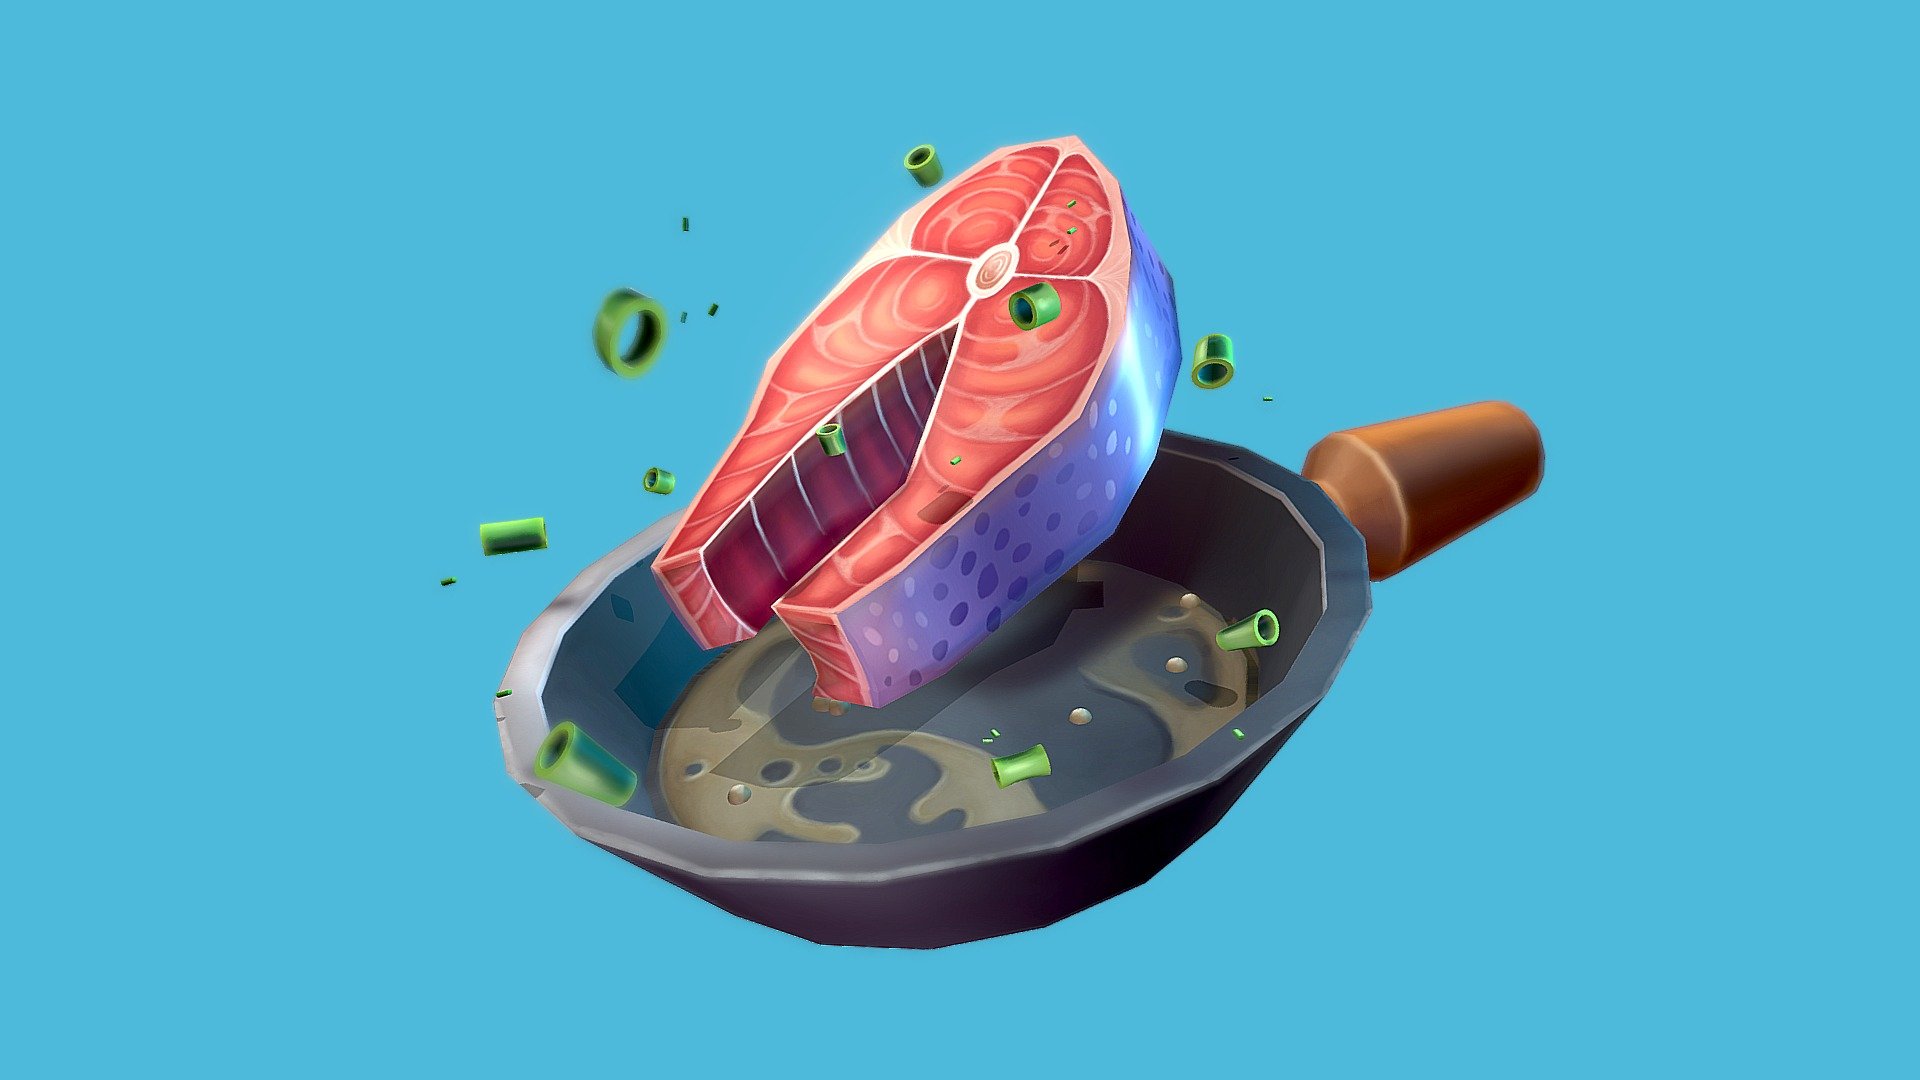 Pan fried salmon anyone? 

Took this oppurtunity to work on my hand painting skills as well as creating concept art into 3D forms.

Concept by Anna Shishkova: https://www.artstation.com/artwork/8w1BdQ

Programs used: Maya, Substance Painter and Photoshop 3d model